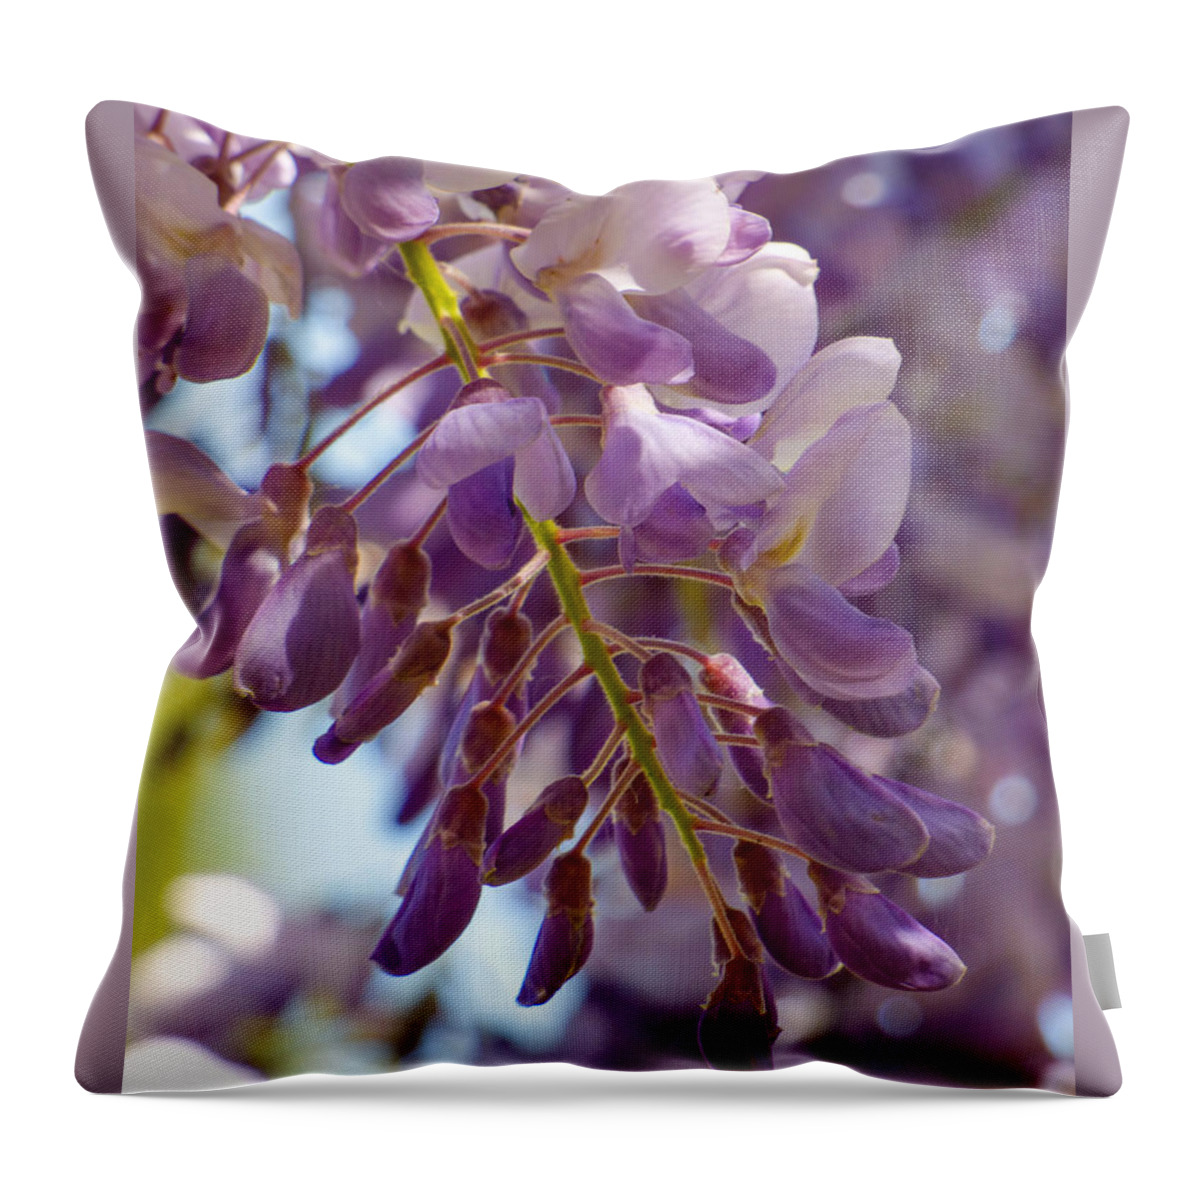 Blooms Throw Pillow featuring the photograph Wisteria Blooms by Steve Taylor